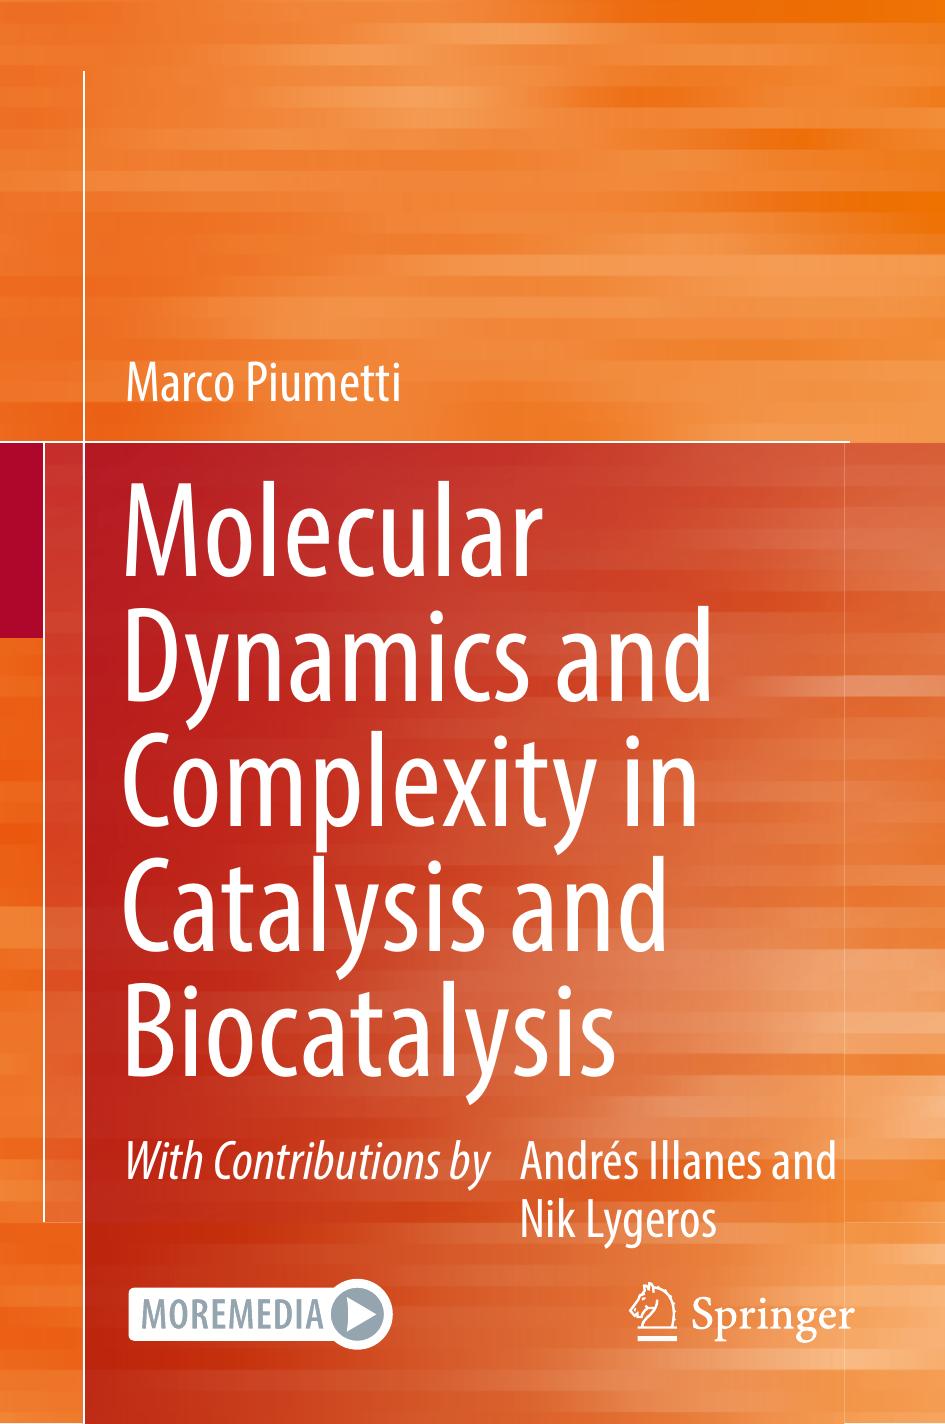 Molecular Dynamics and Complexity in Catalysis and Biocatalysis by Marco Piumetti